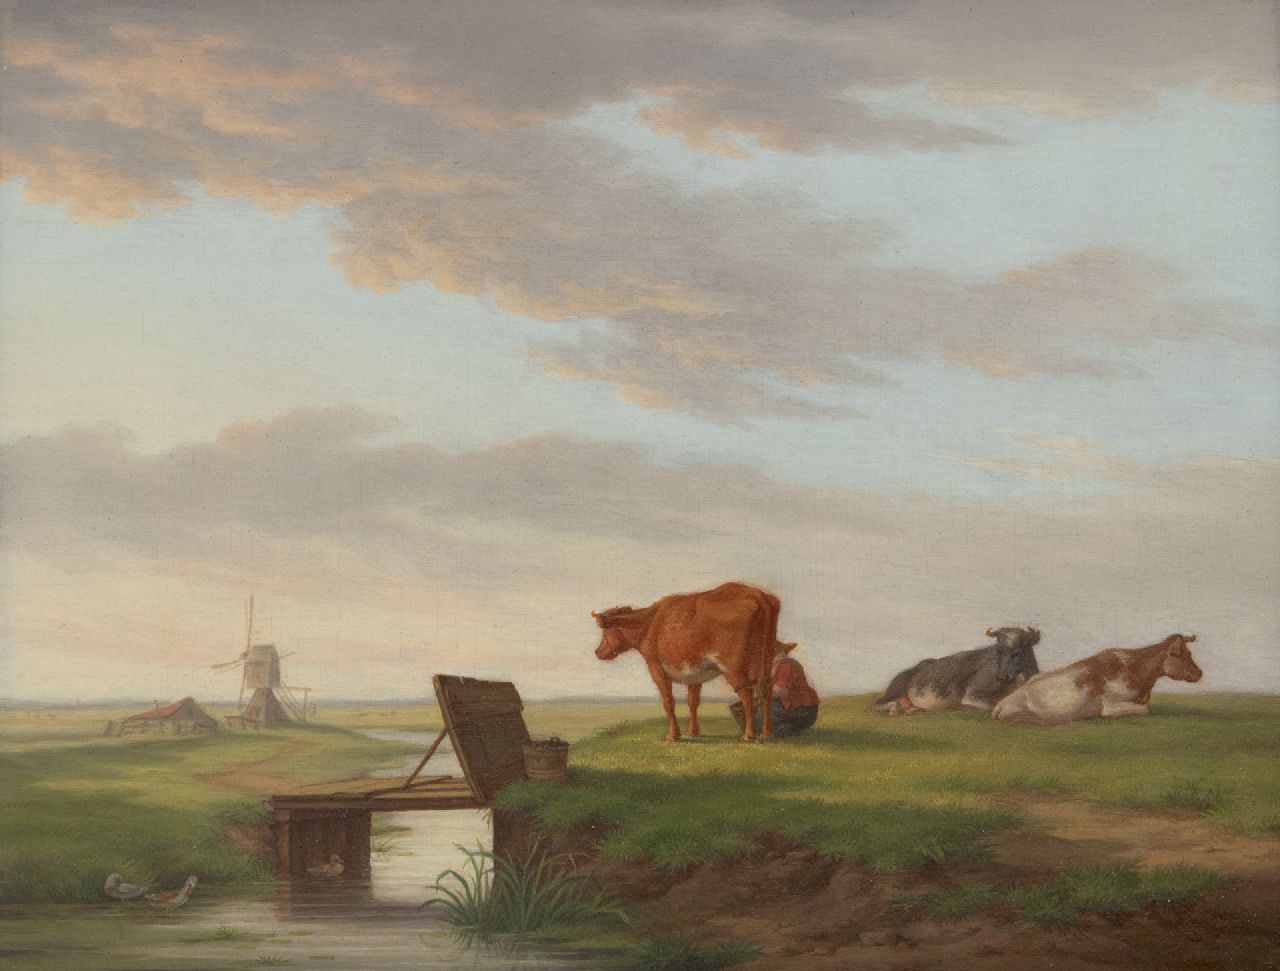 Burgh H.A. van der | Hendrik Adam van der Burgh | Paintings offered for sale | Cows in a landscape with a mill, oil on panel 20.4 x 26.3 cm, signed l.r. and painted 1821